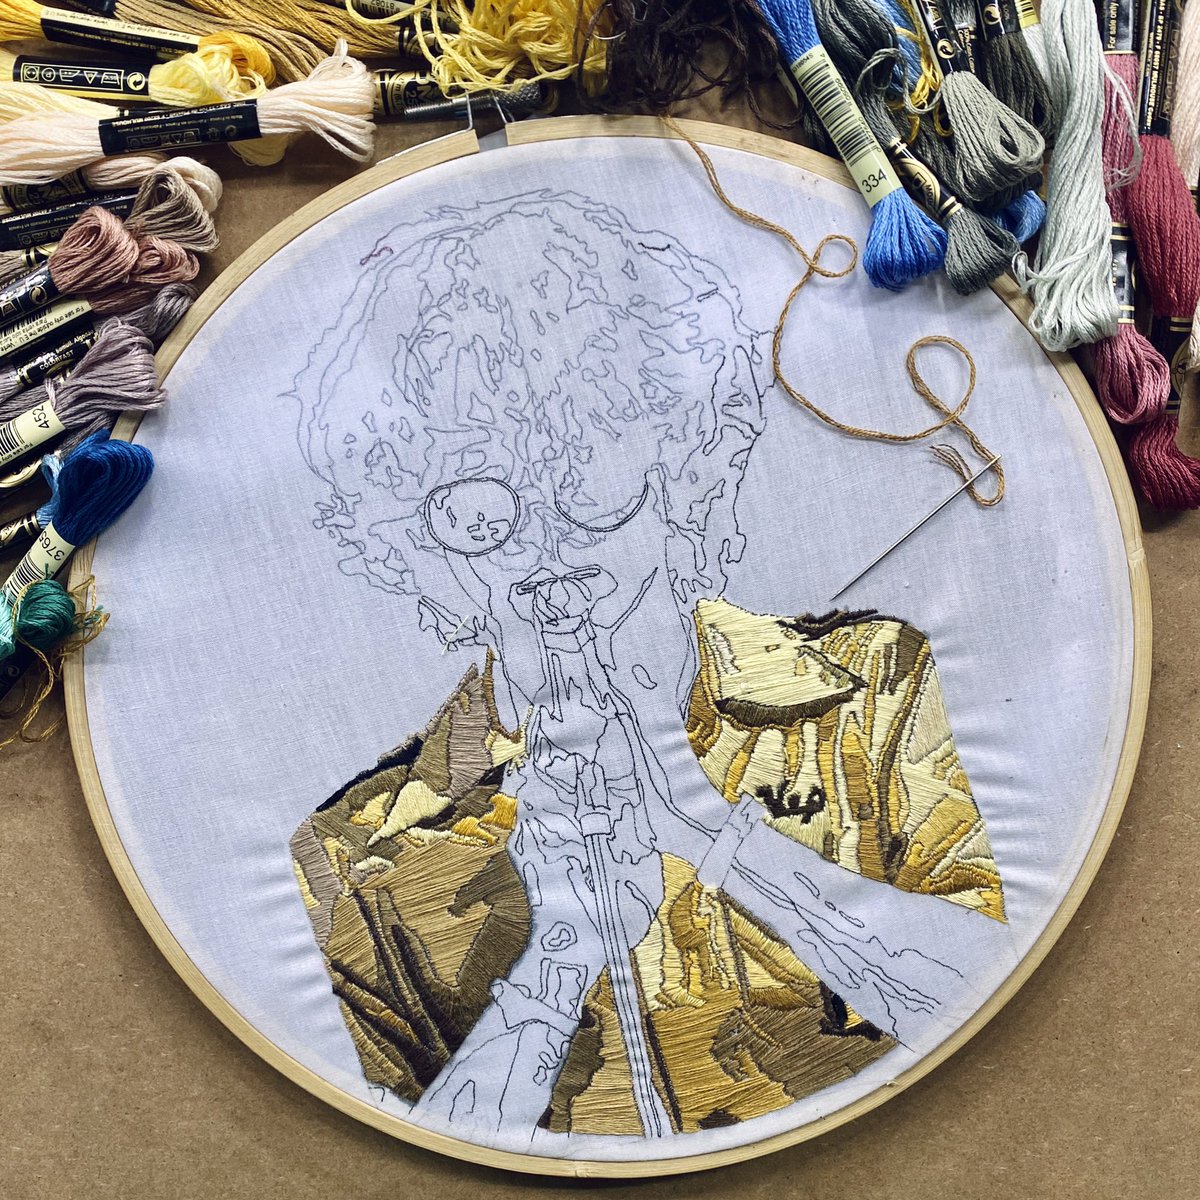 Day 3. Portrait embroidery of Junghoon in process 
#embroidery #portraitembroidery #jannabi #jannabijh #bandjannabi #choijunghoon #잔나비 #잔나비최정훈 #art #threadpainting